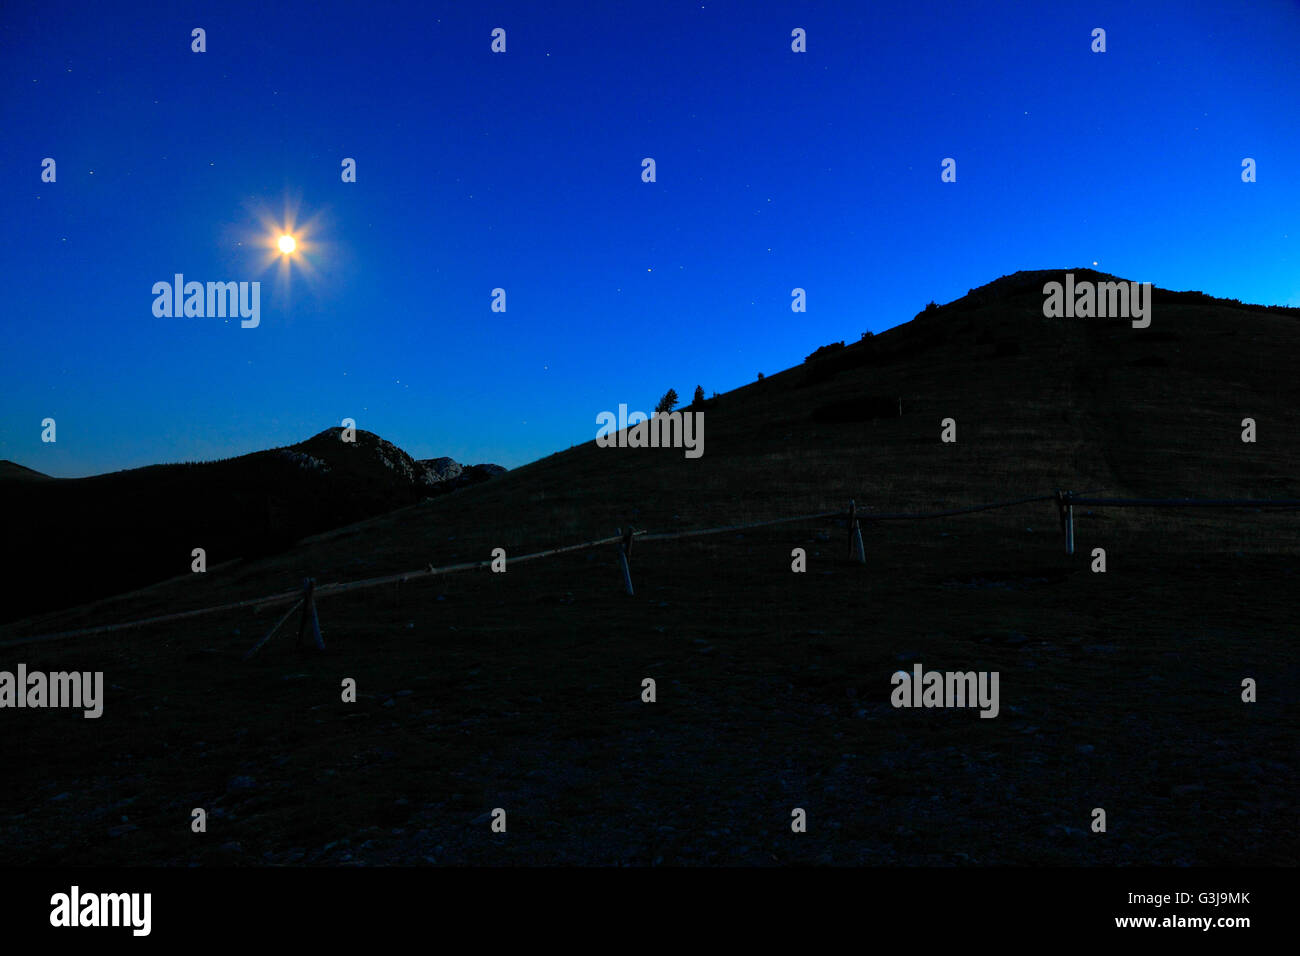 Mountain in the night with moon on the sky Stock Photo